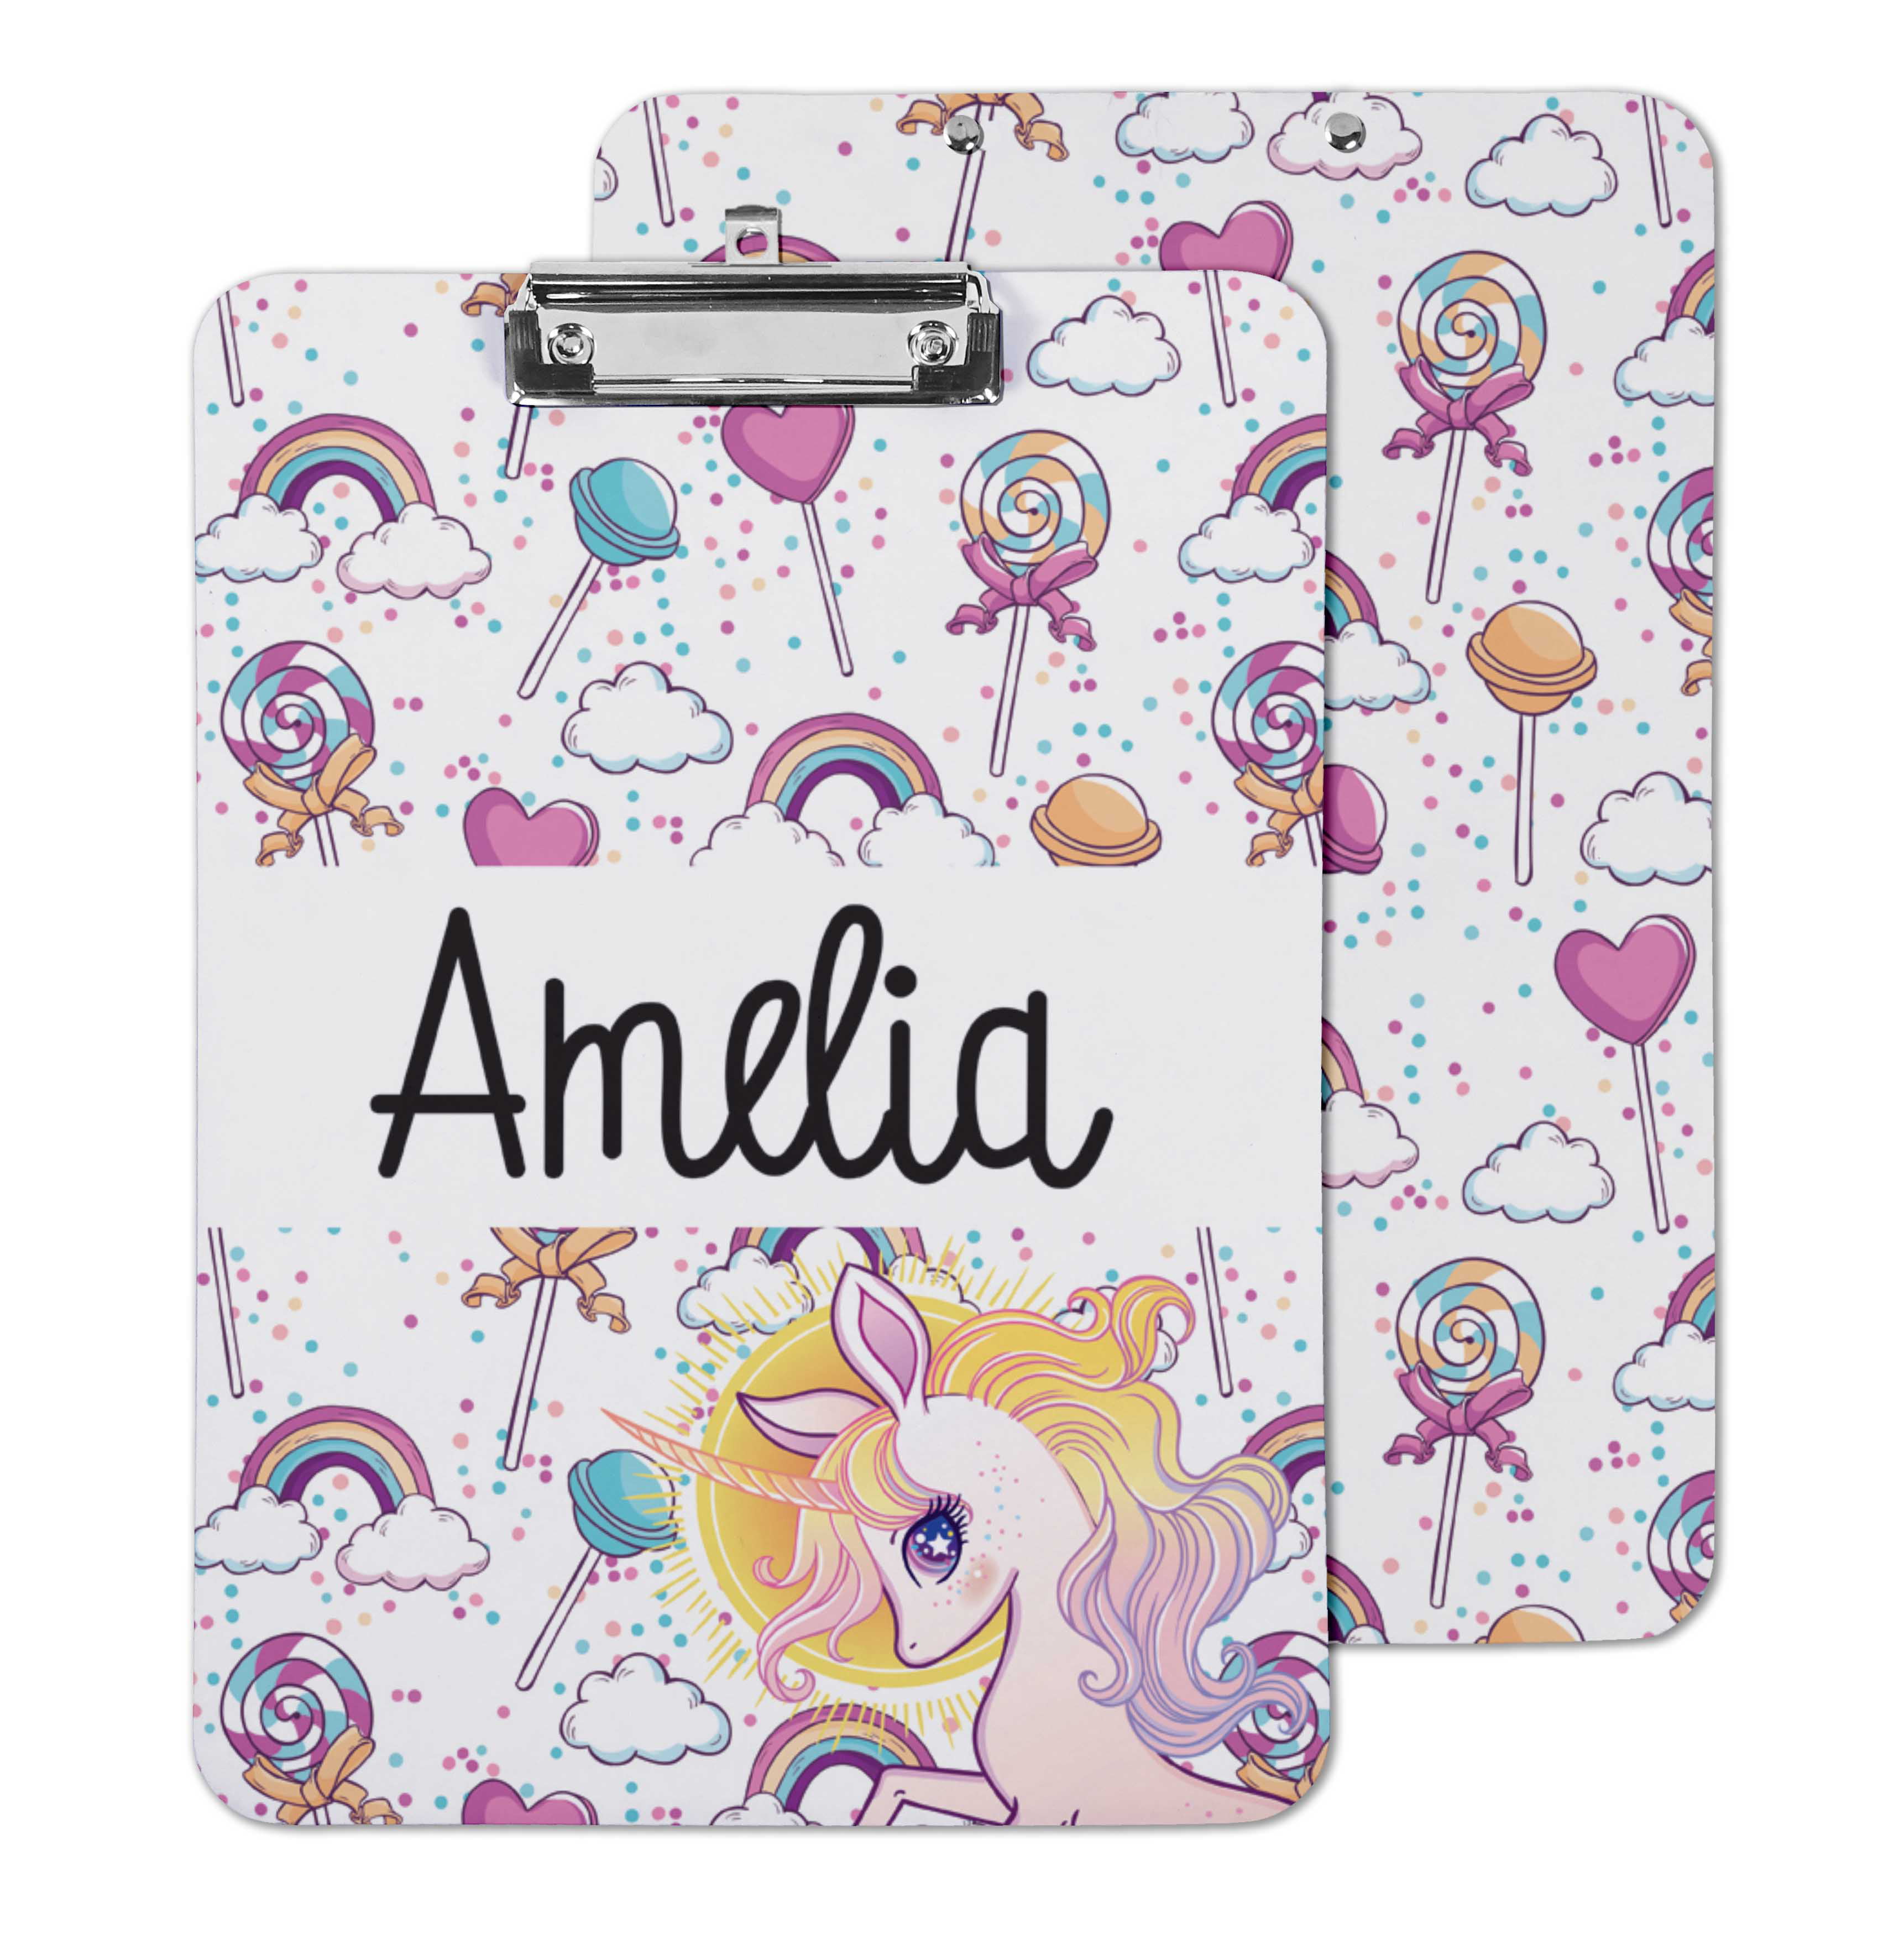 Printtoo Personalized Gift For Kids Decorative Clipboard for Girls,Office-naM 